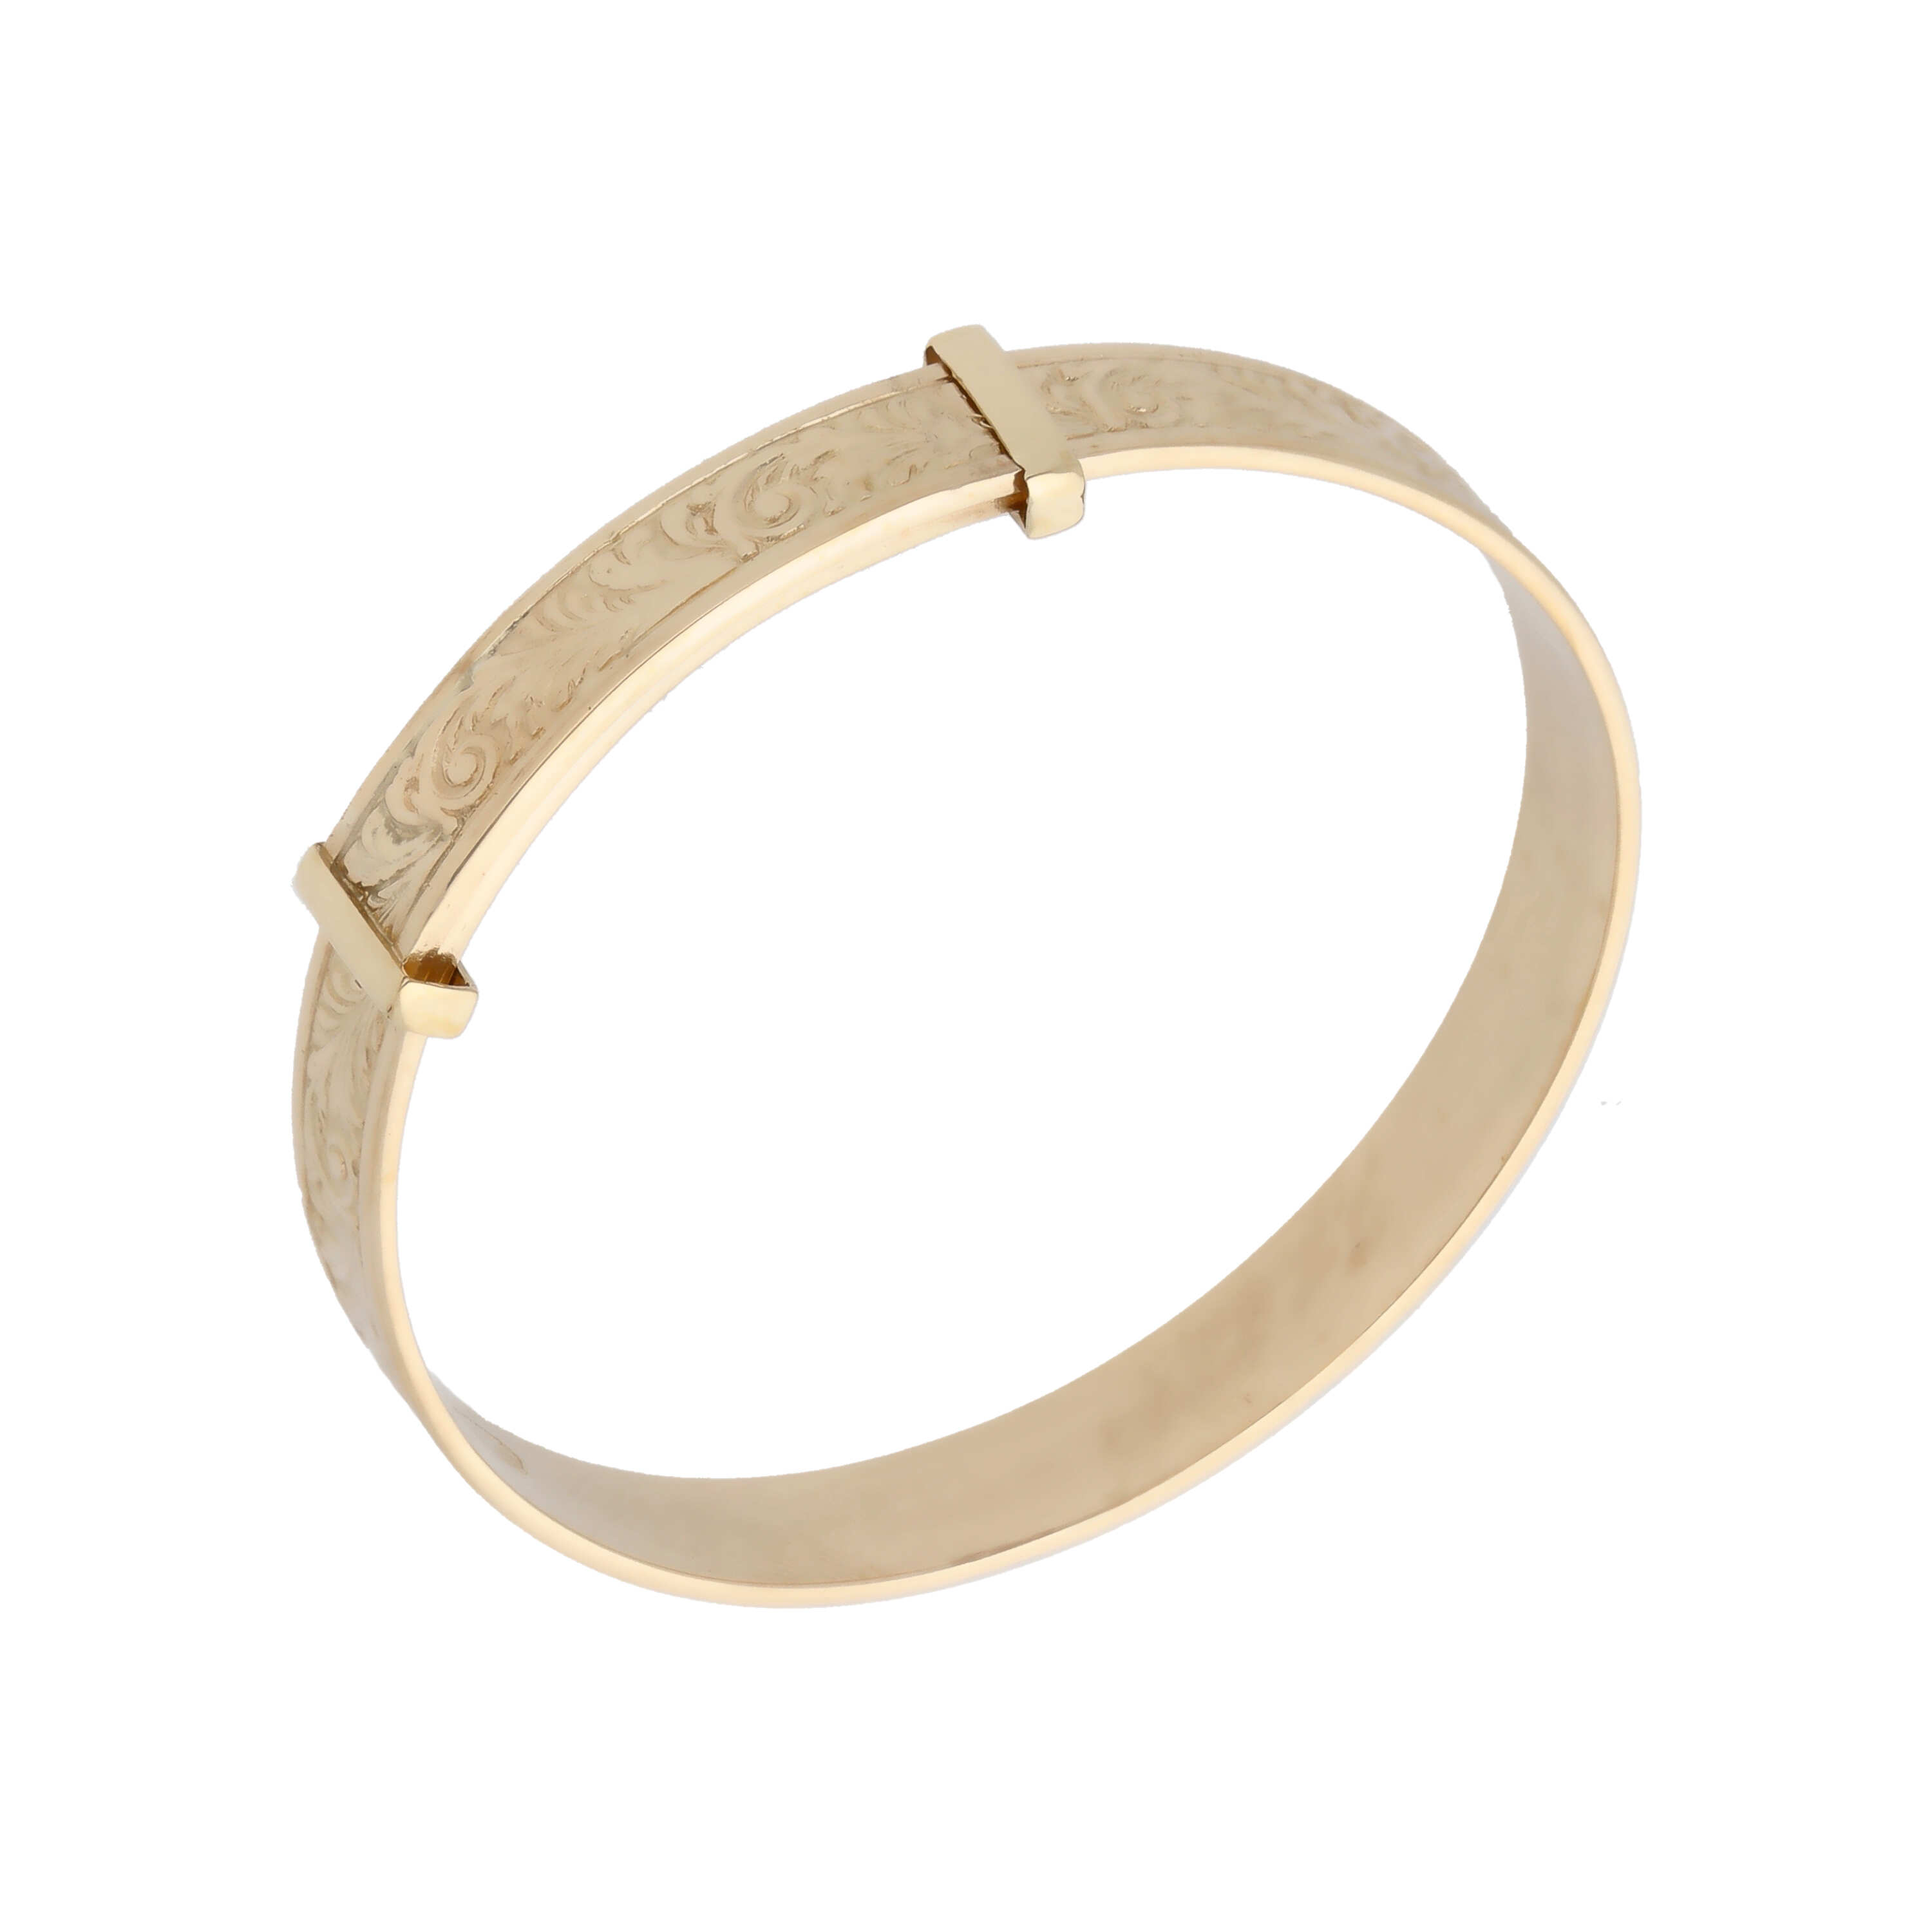 9ct Gold Heavy Patterned Expanding Childs Bangle